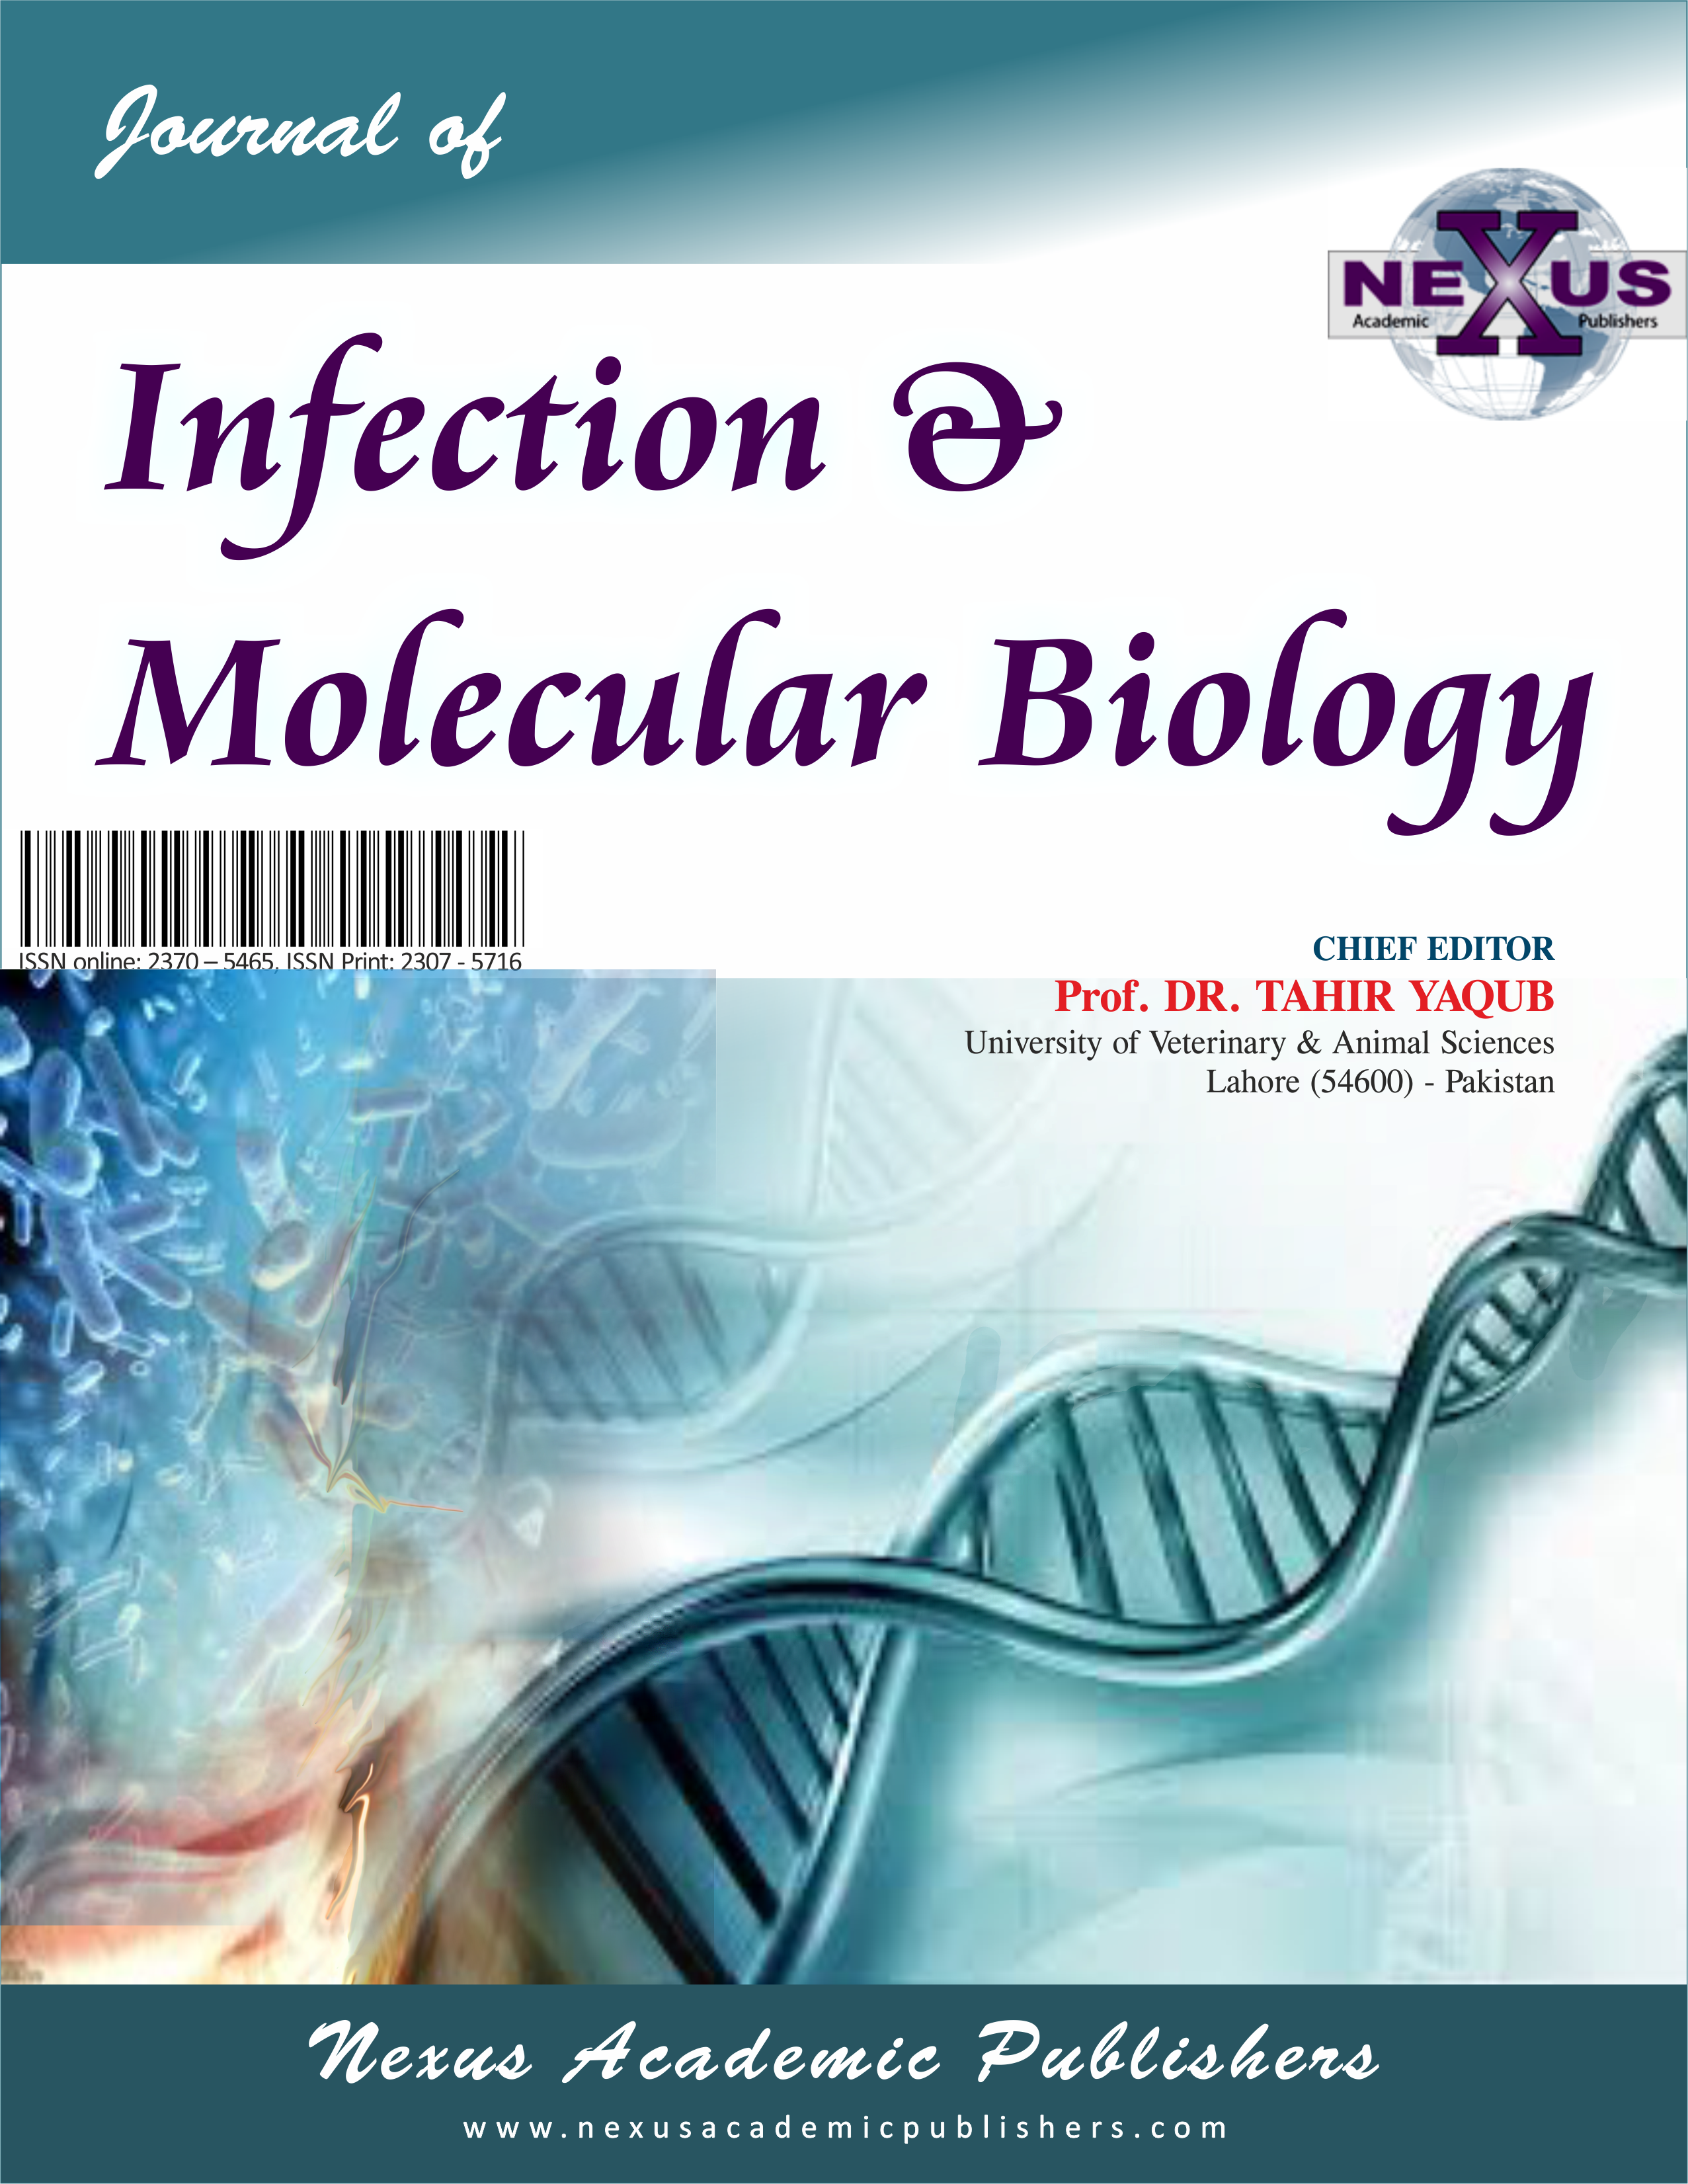 Journal of Infection and Molecular Biology